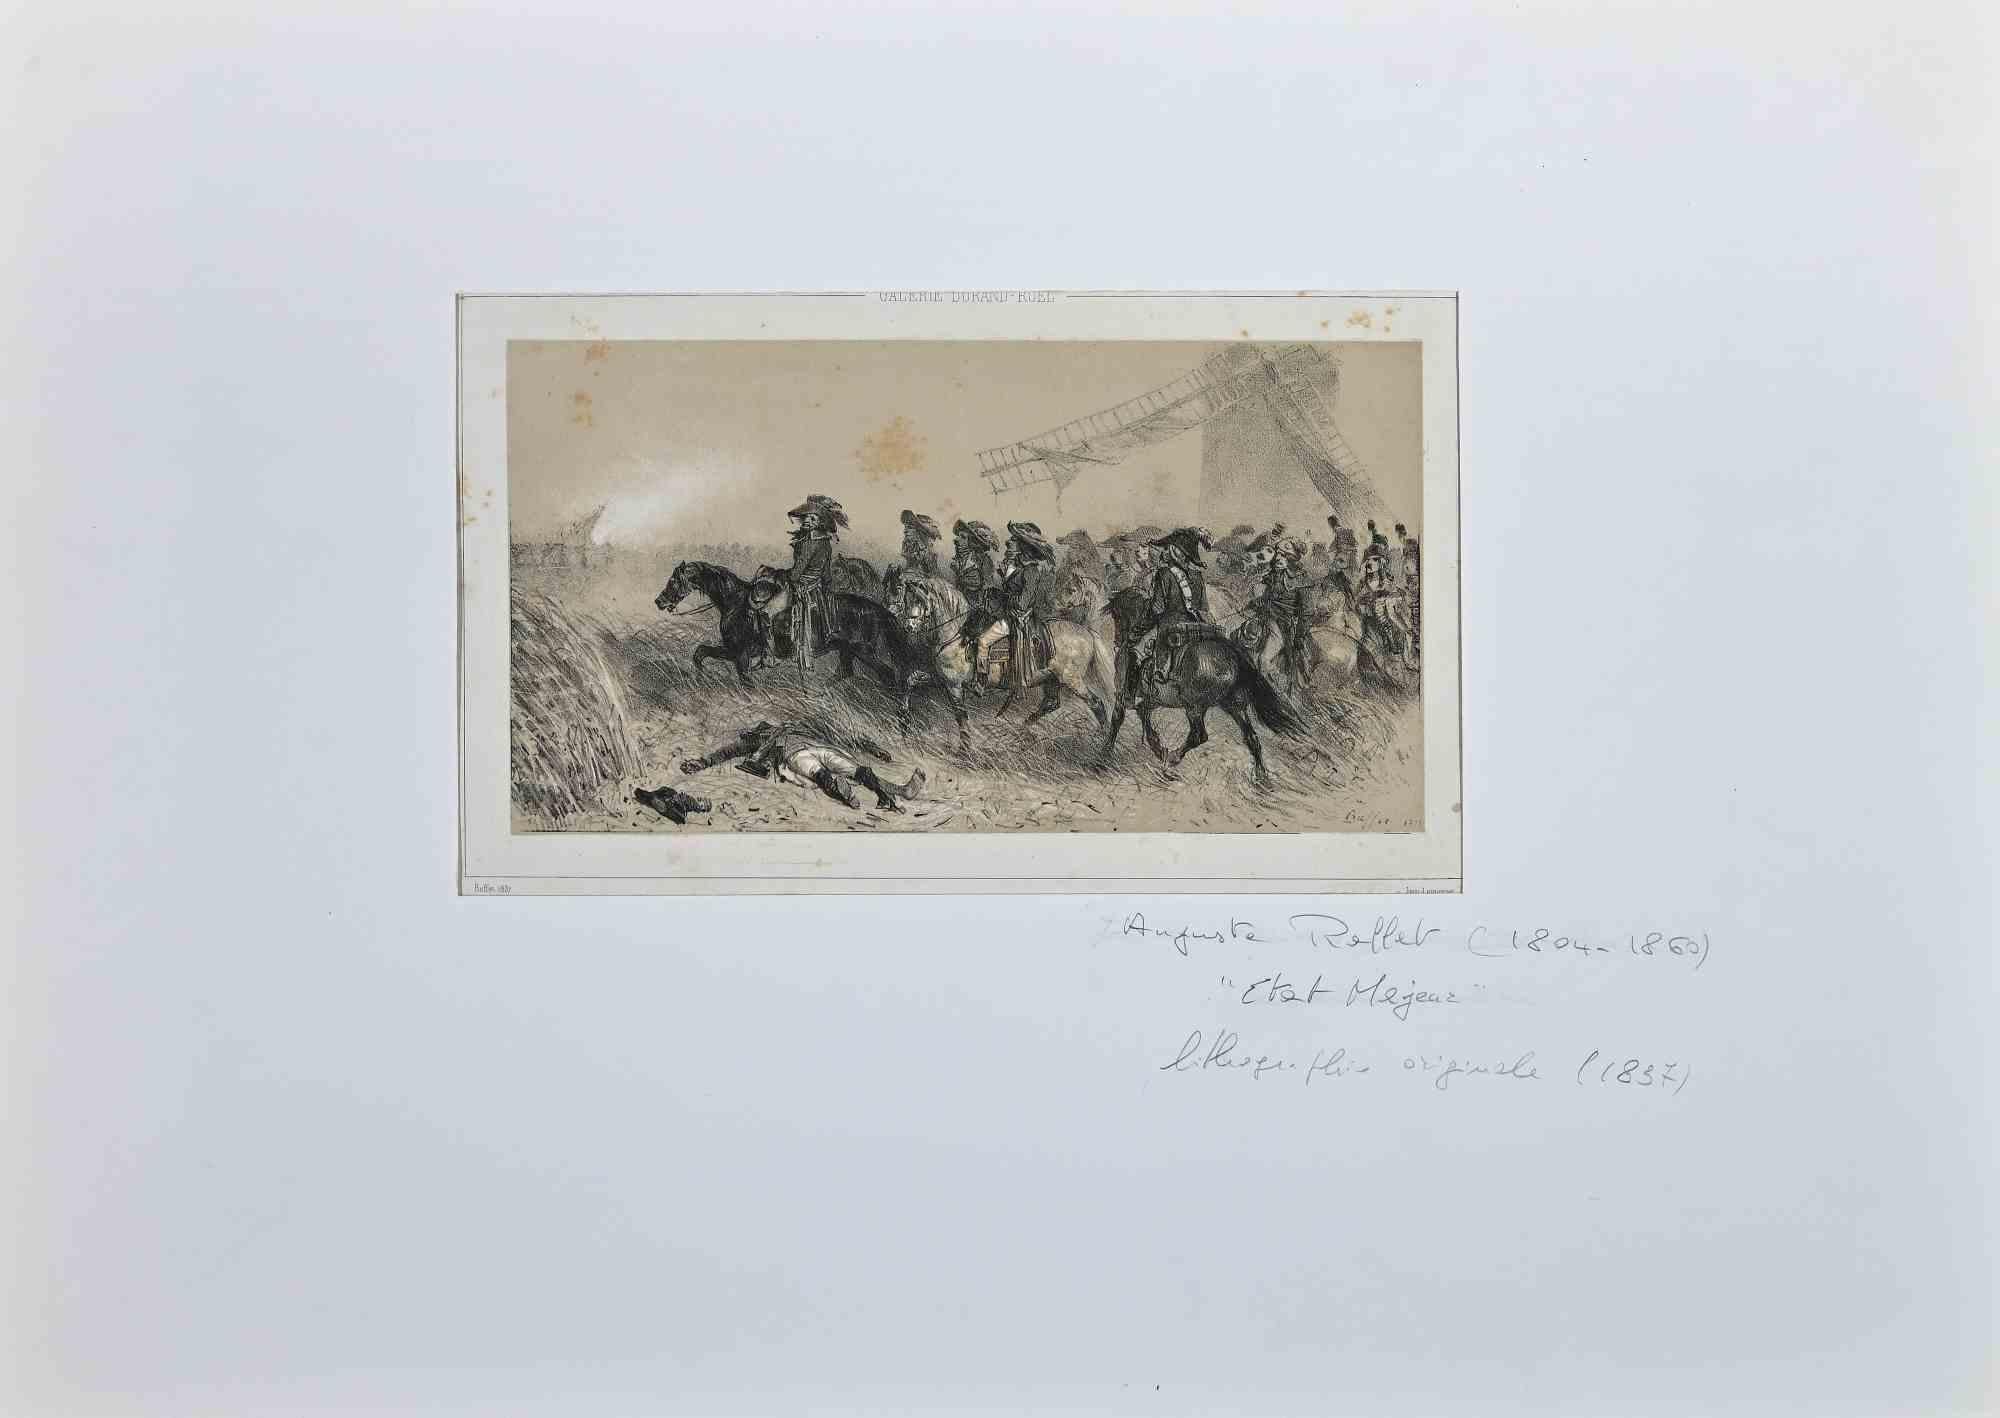 State Major is an original Lithograph realized by Denis Auguste Marie Raffet in 1837.

Signature on the lower right corner.

Good condition, included a white cardboard passpartout (35x49 cm).

Denis Auguste Marie Raffet (2 March 1804 – 16 February